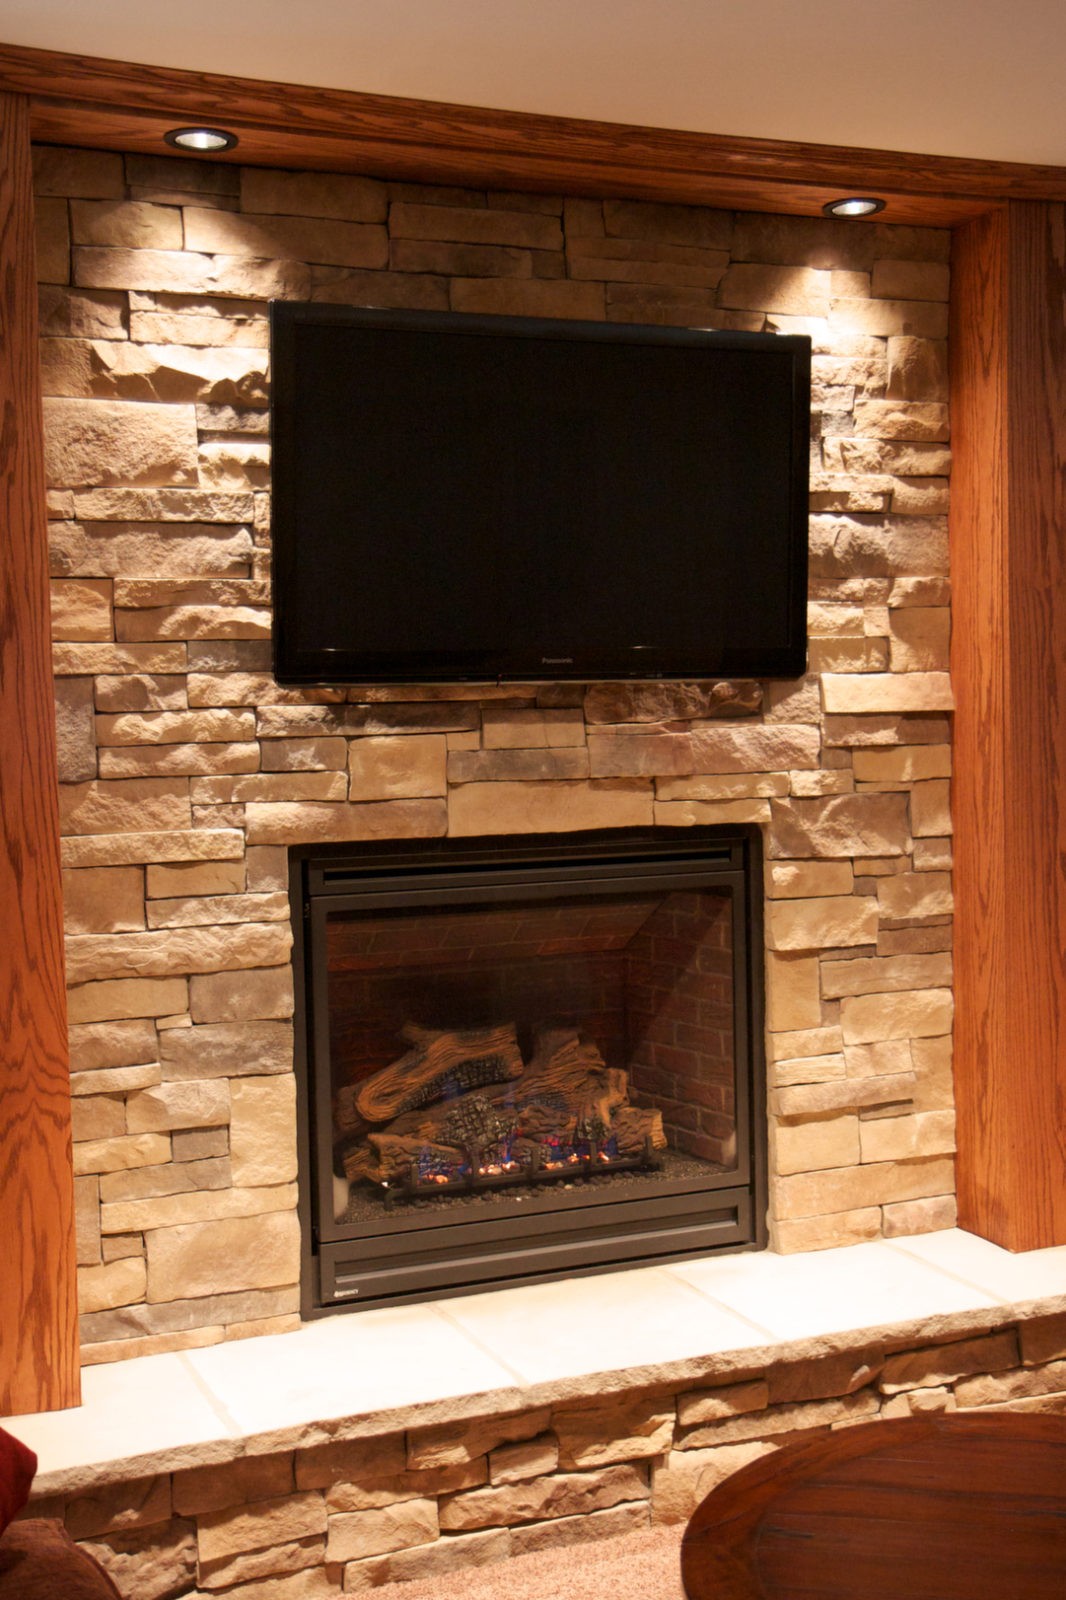 Mountain stack stone veneer with a wooden frame